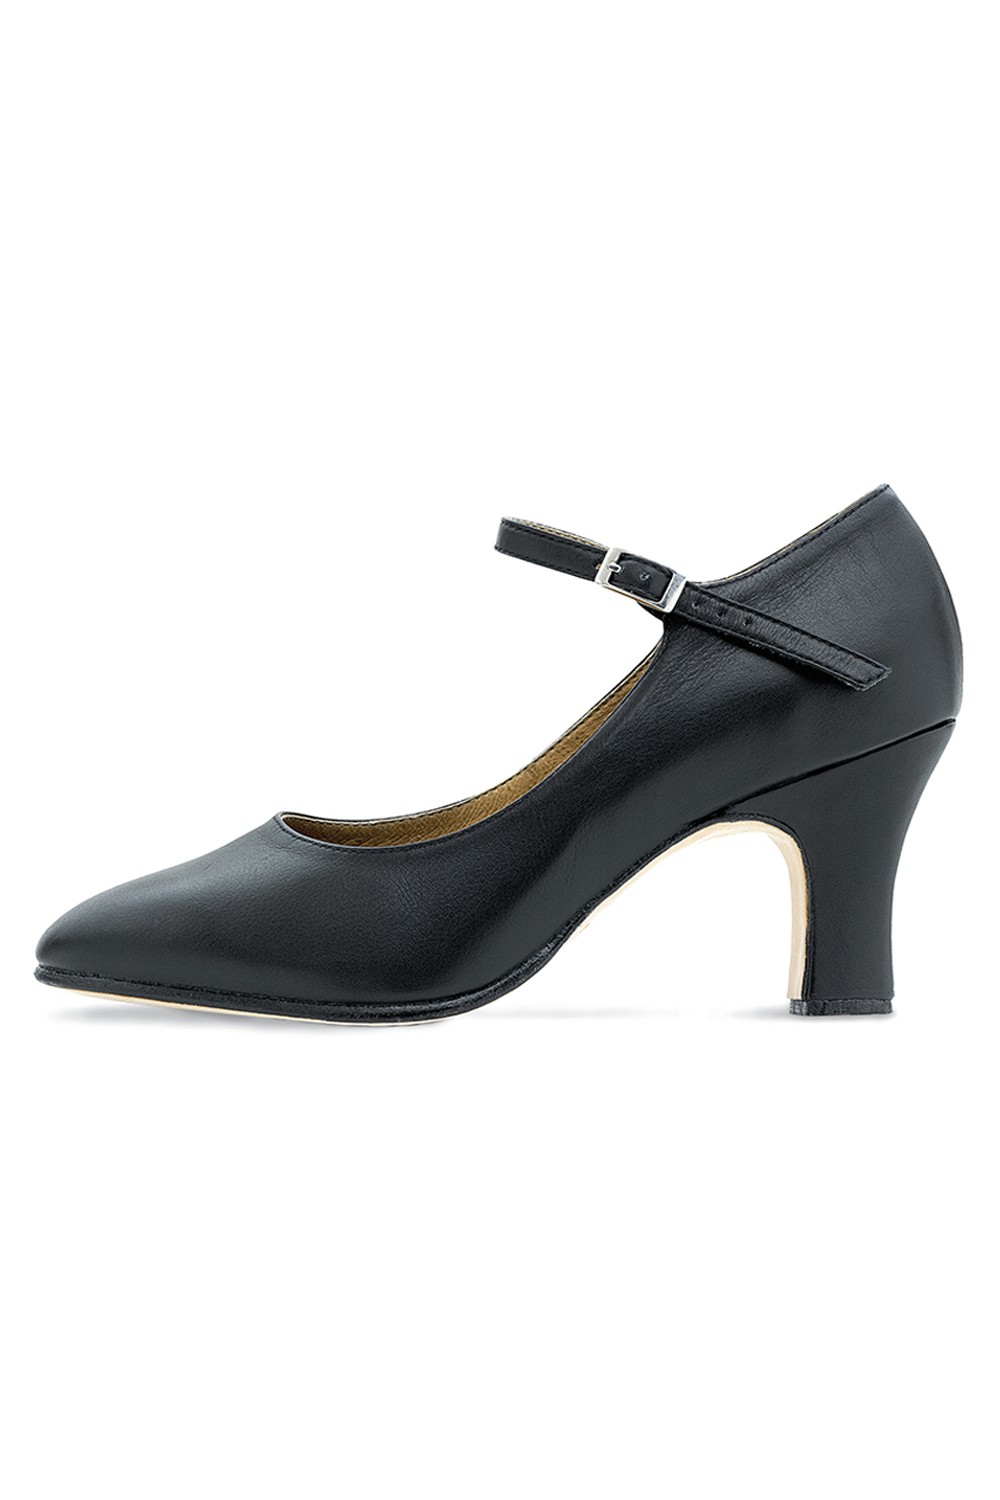 Professional BLOCH® Character Shoes - BLOCH® US Store